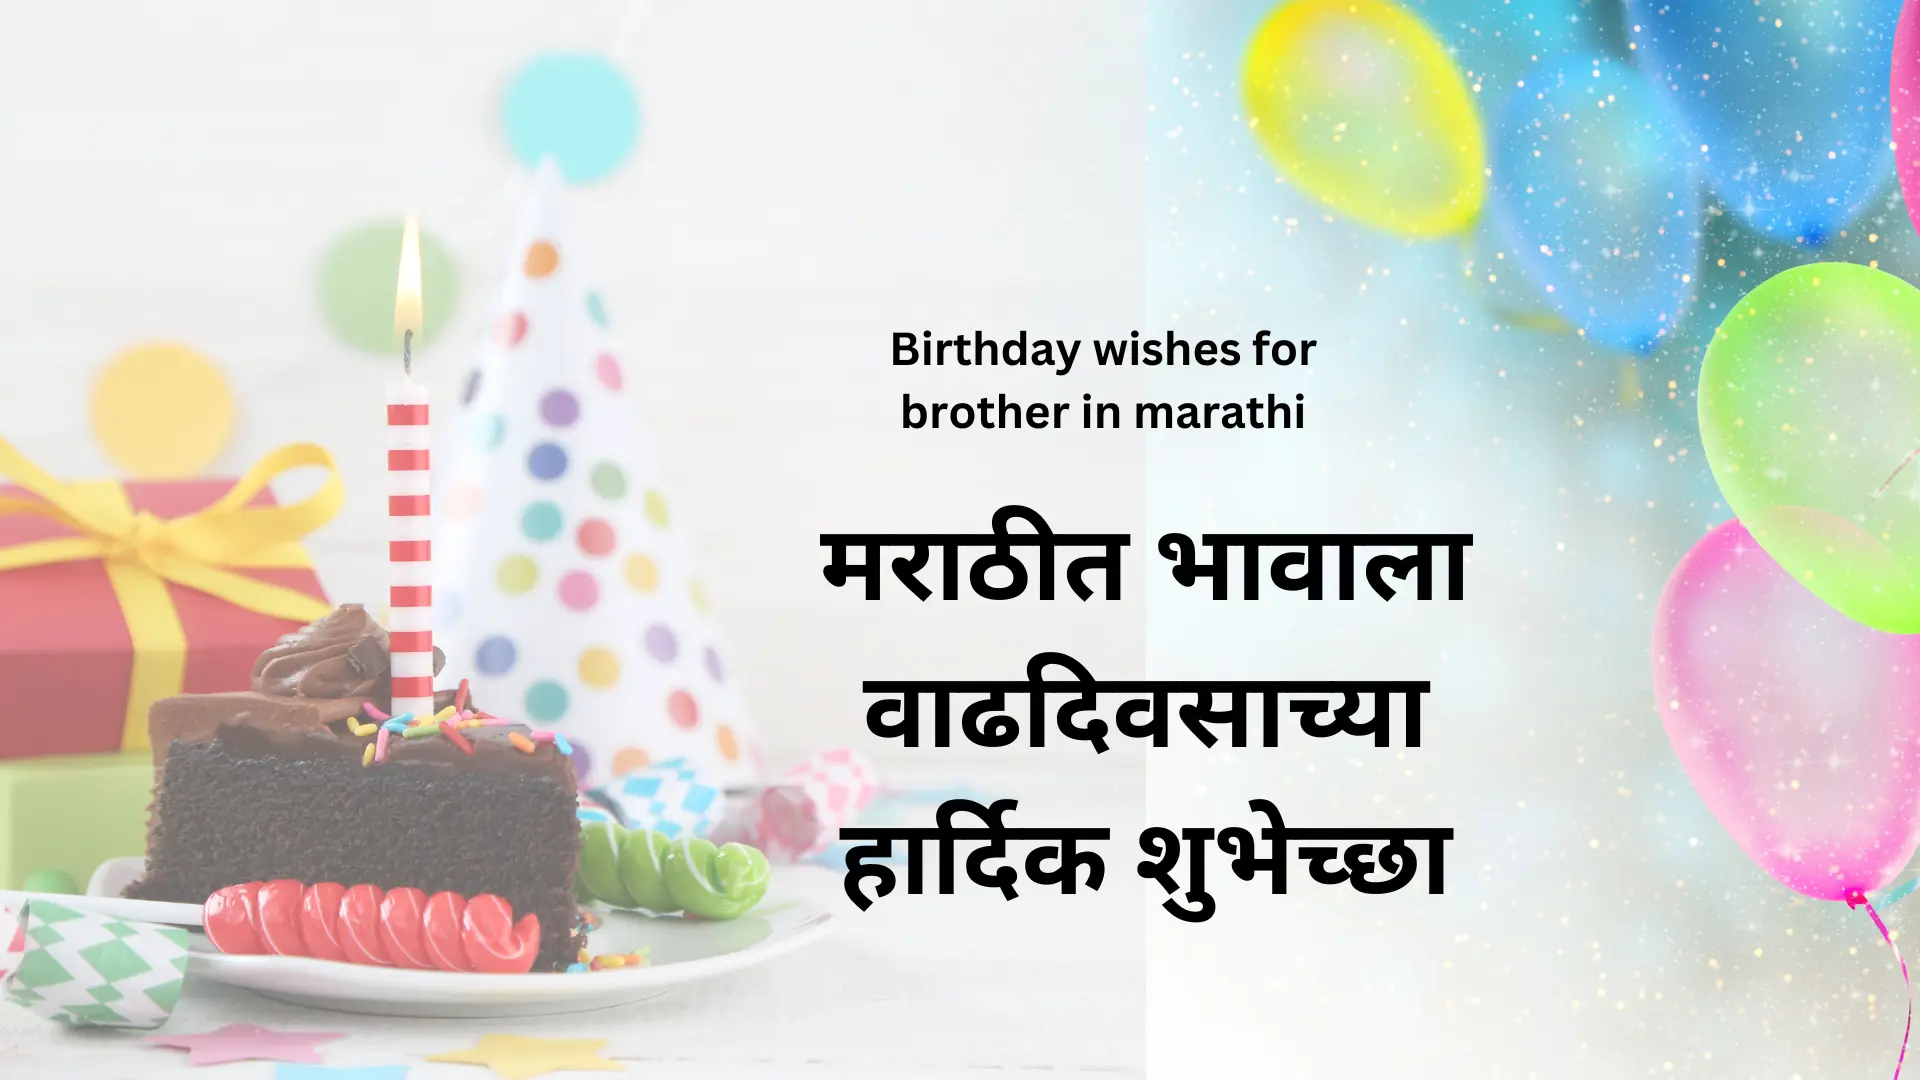 Birthyday wishes for brother in Marathi